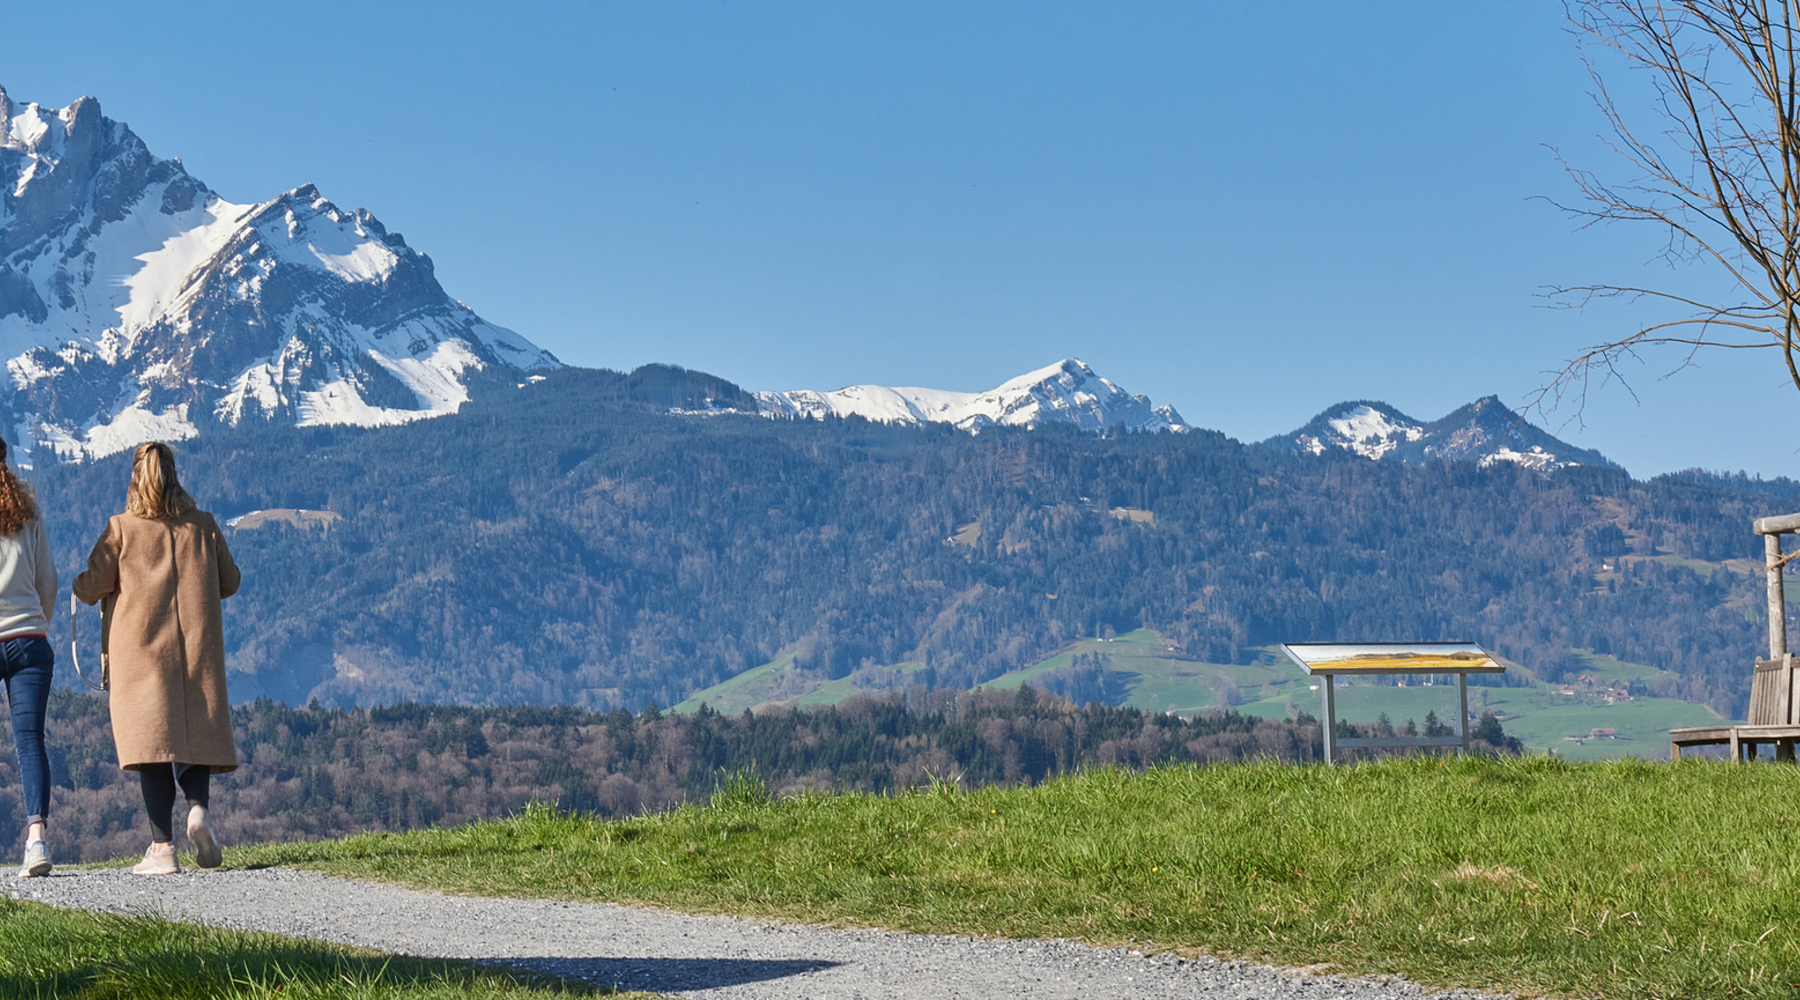 <span class='cycle-icon HIKING'></span><span class='cycle-title'>HIKING</span><span class='cycle-subtitle'>2.5 km long circular trail with a fantastic view of the city of Lucerne, the lake and the mountains</span>